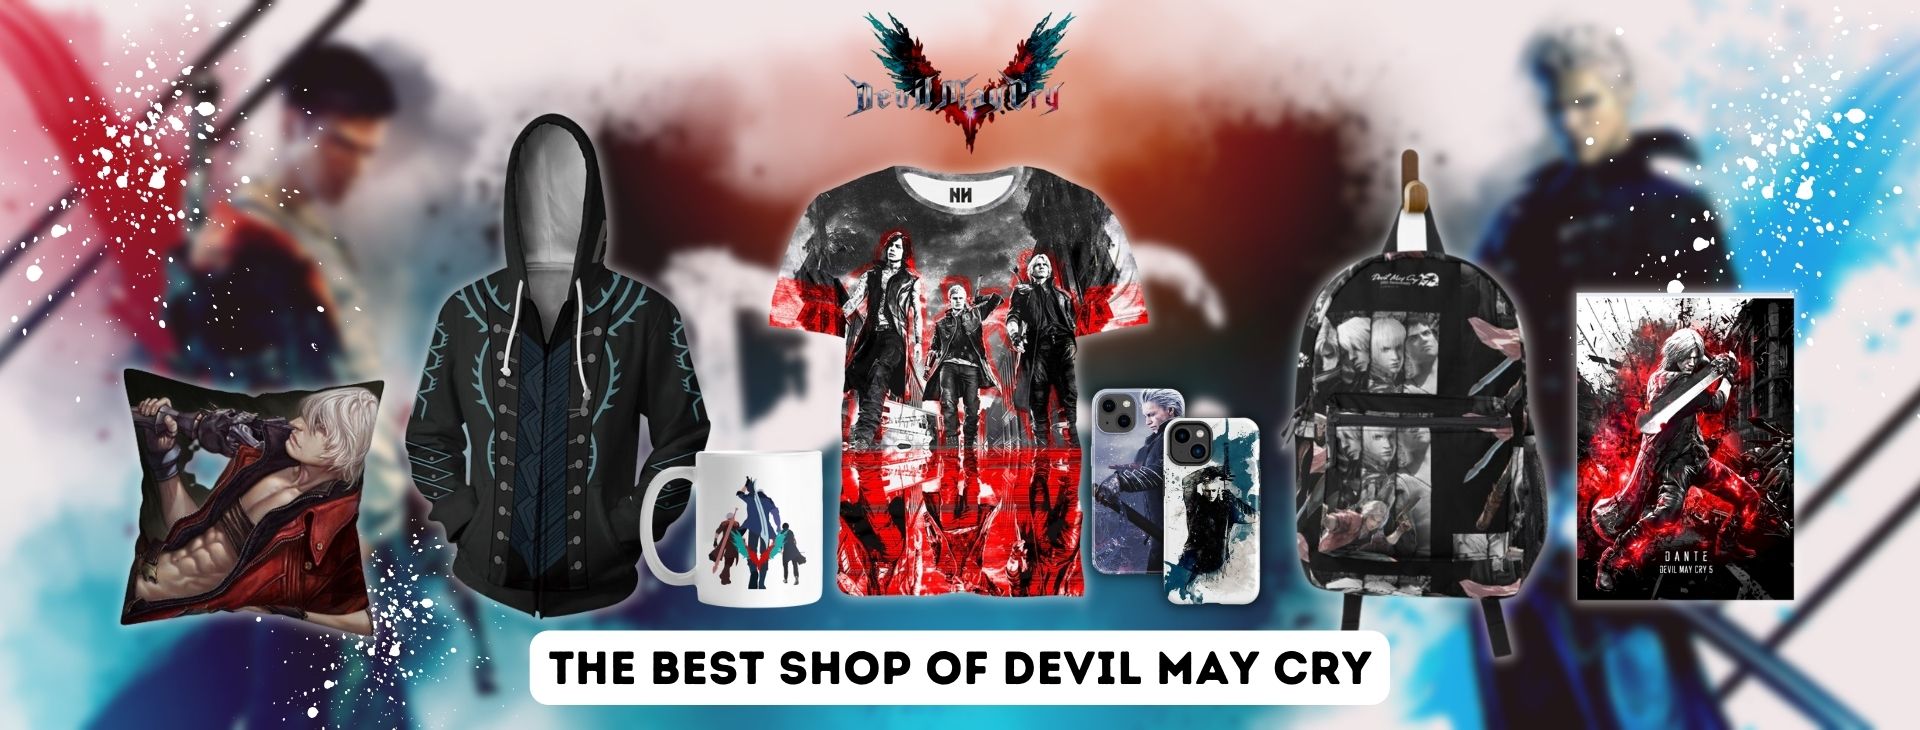 Devil May Cry Merch Shop Banner - Devil May Cry Shop